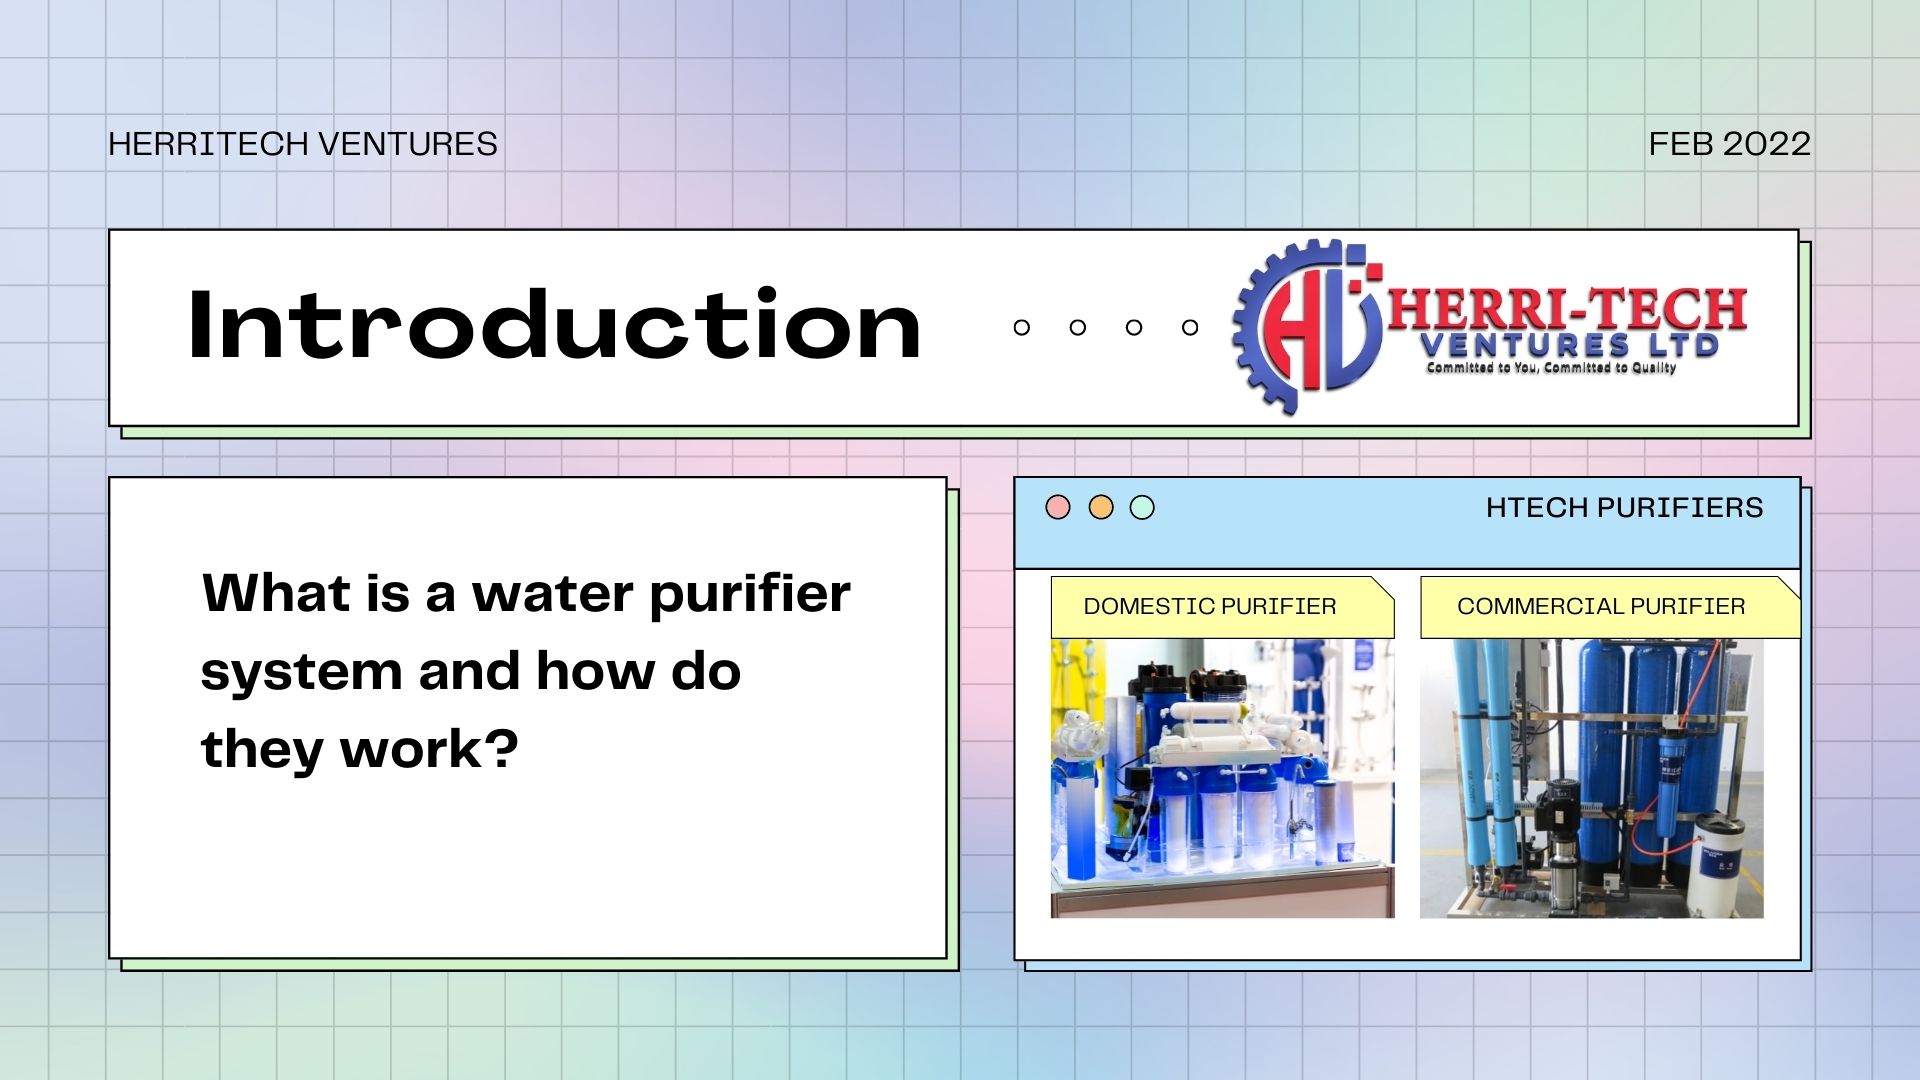 What is a water purifier system and how do they work?